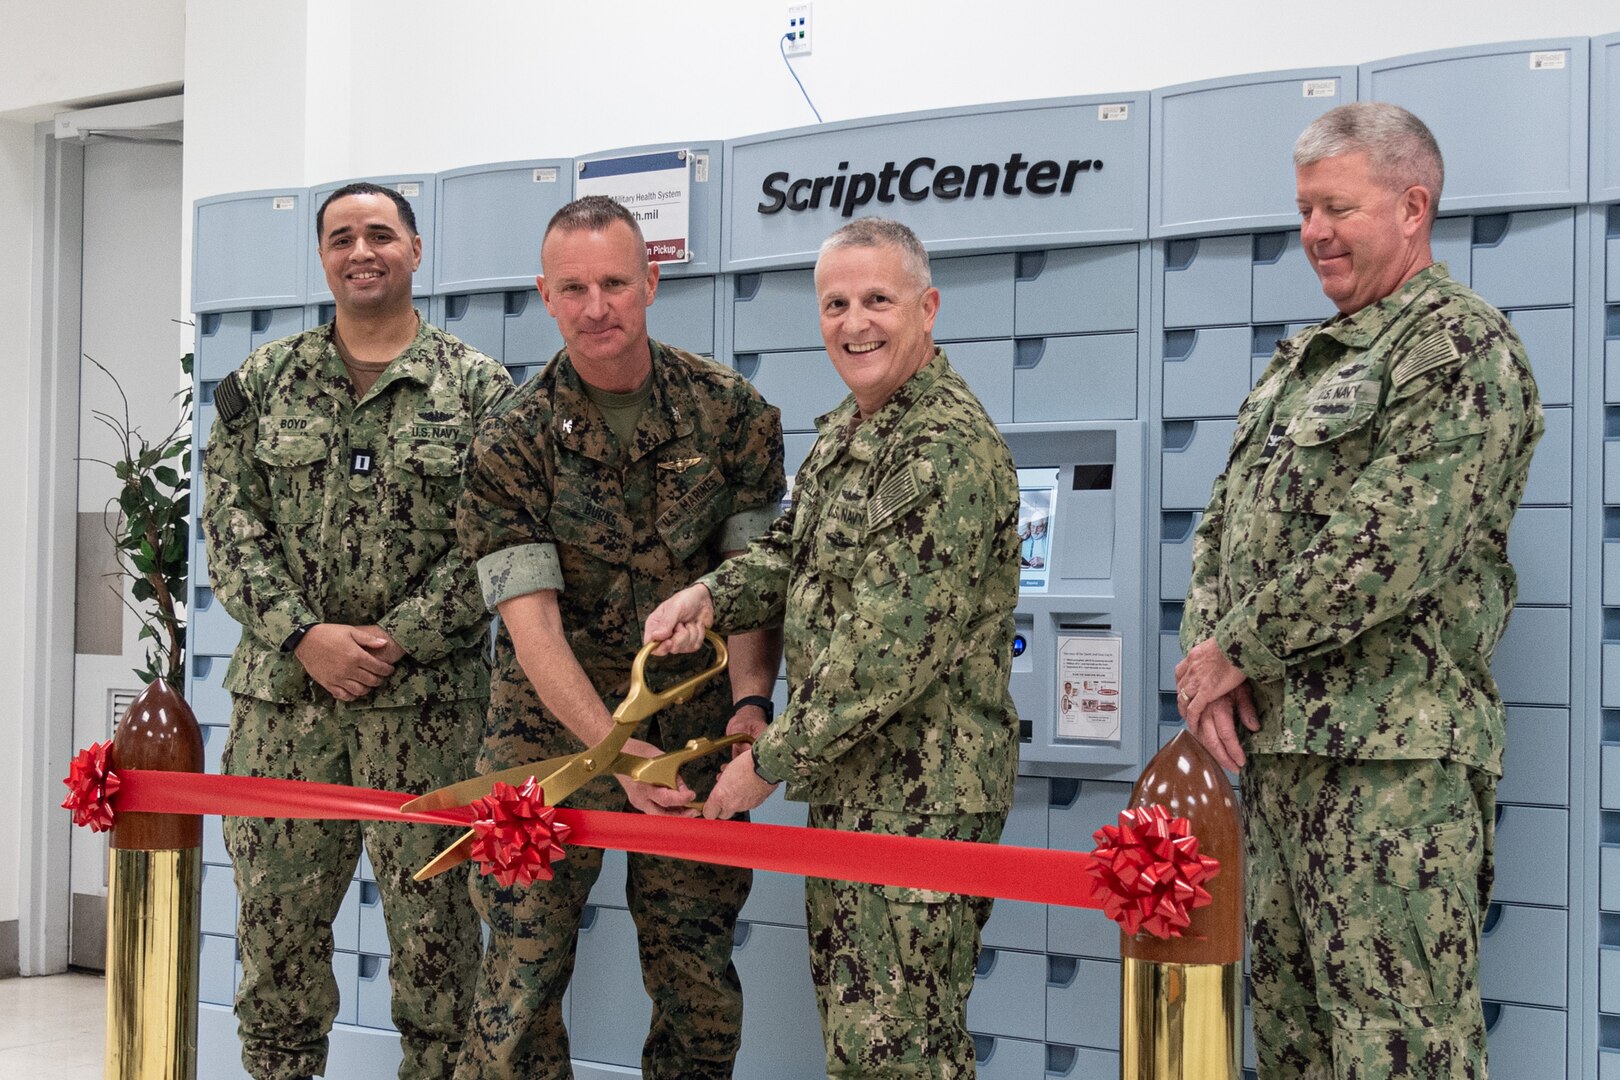 U.S. Marine Col. Brendan Burks, center left, MCAS Cherry Point commanding officer, and Navy Capt. Sean Barbabella, center right, commanding officer of Naval Health Clinic Cherry Point, cut a ribbon marking the official opening of the installation’s ScriptCenter on Thursday, March 21, 2024.

ScriptCenters are contactless, automated lockers employing state-of-the-art technology and provide convenient and secure access to most prescriptions. Cherry Point’s ScriptCenter is inside the Marine Corps Exchange building, adjacent to the internal Commissary entrance.